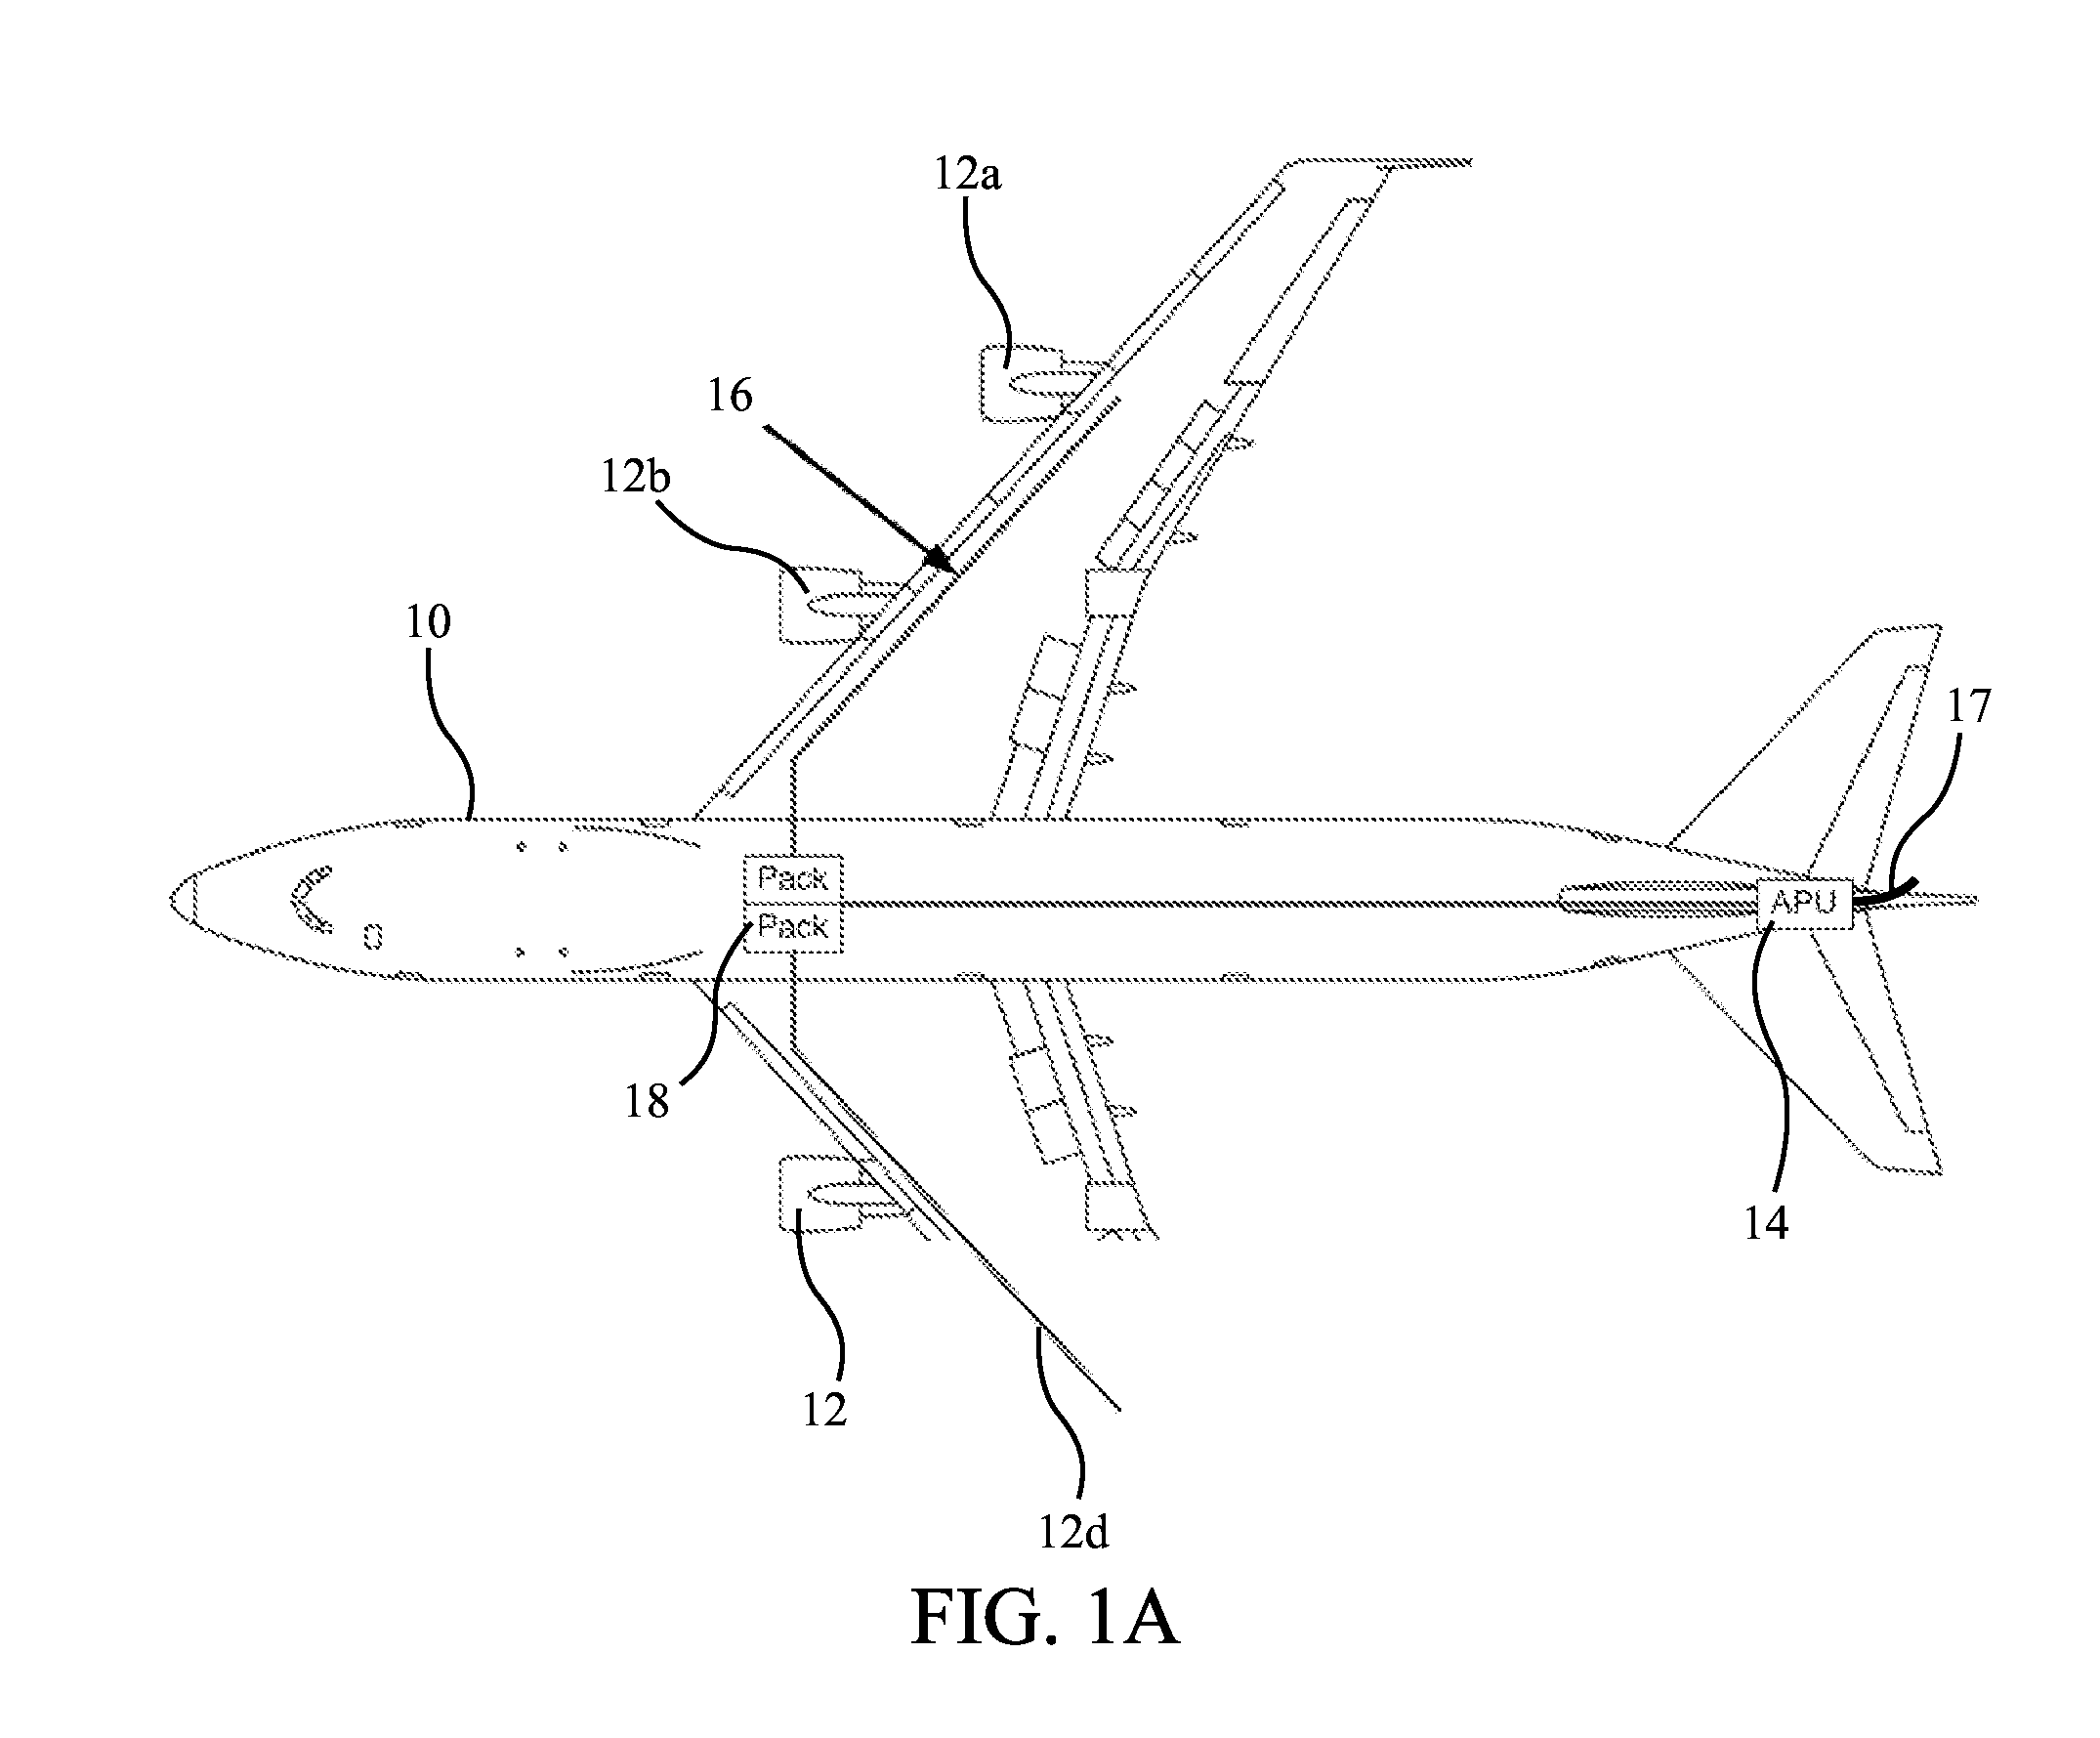 Methods for recovering waste energy from bleed air ducts